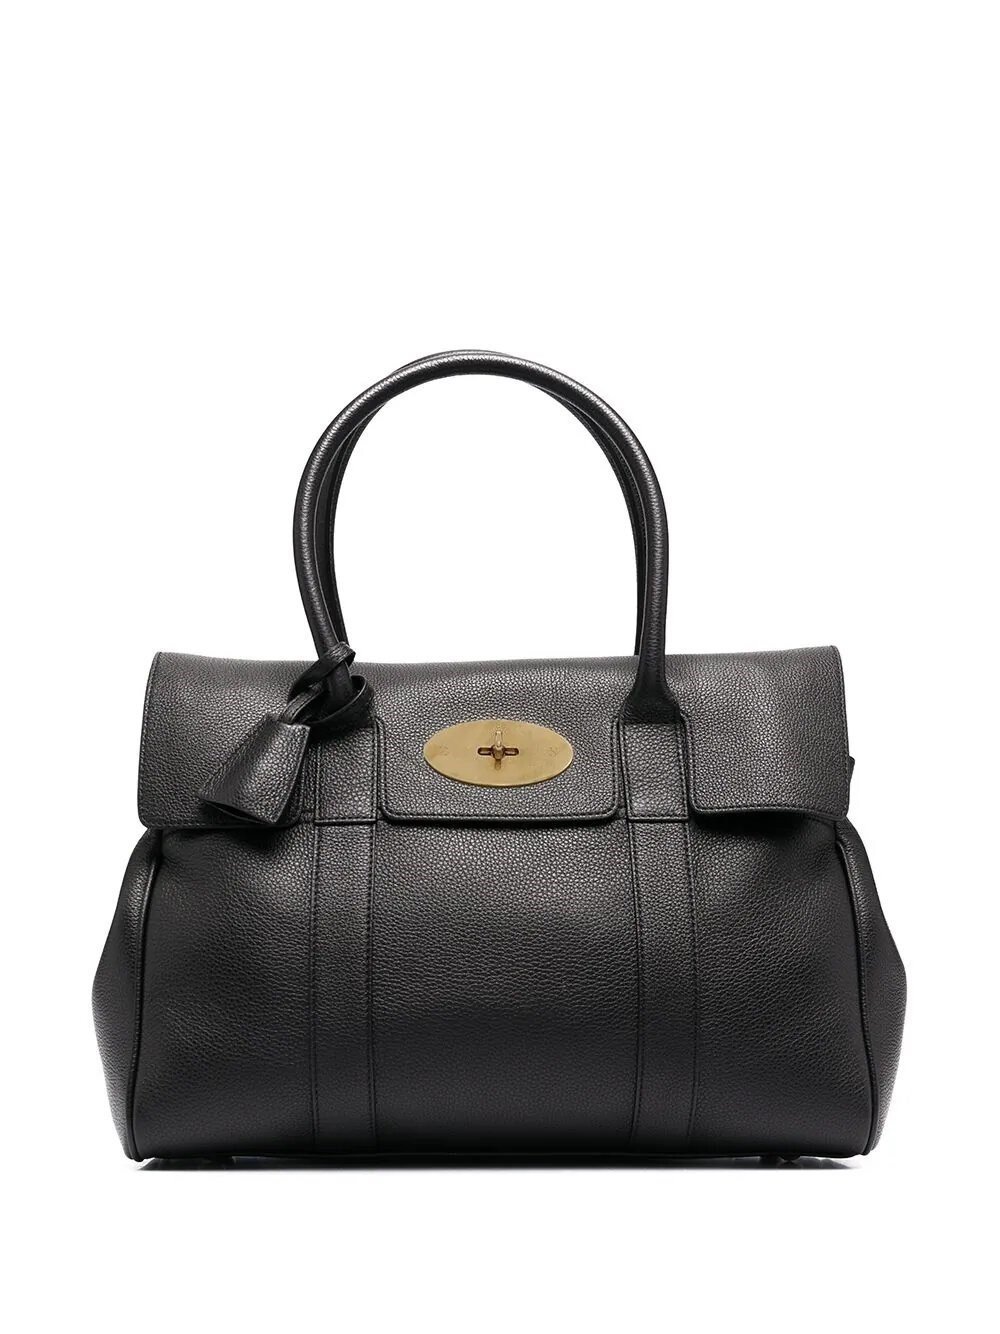 Mulberry Bayswater In Black  